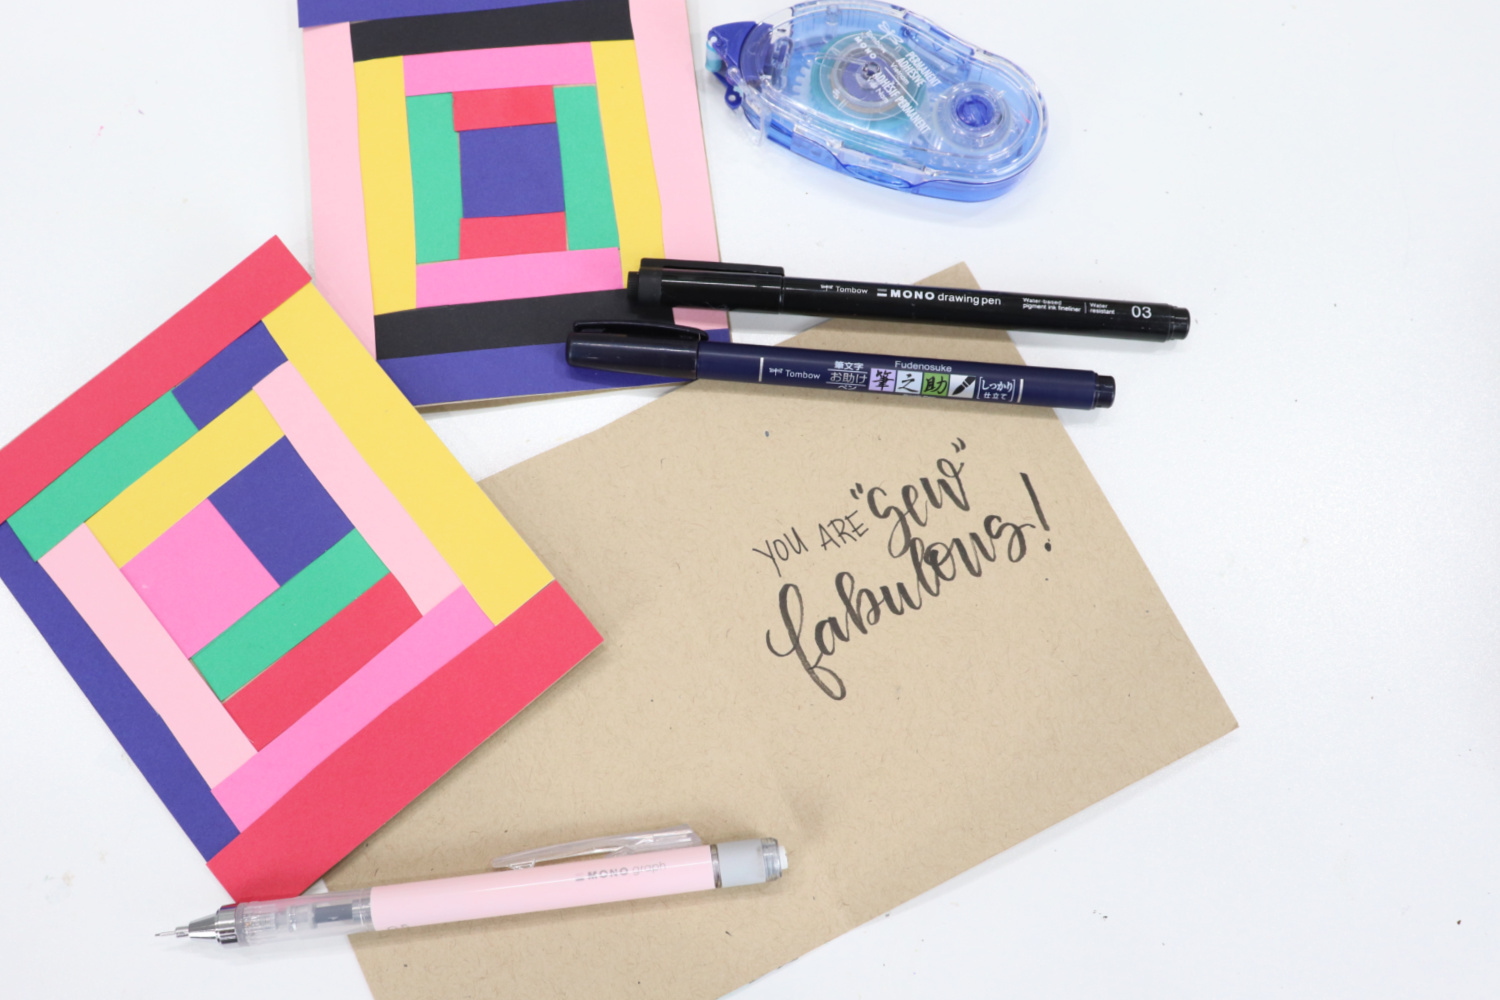 Image contains three cards; two show the fronts covered with colored cardstock strips, while the third is open to show the words, “you are ‘sew’ fabulous” written inside in black ink. Two black pens, a pink mechanical pencil, and an adhesive tape runner sit around the cards on a white table.